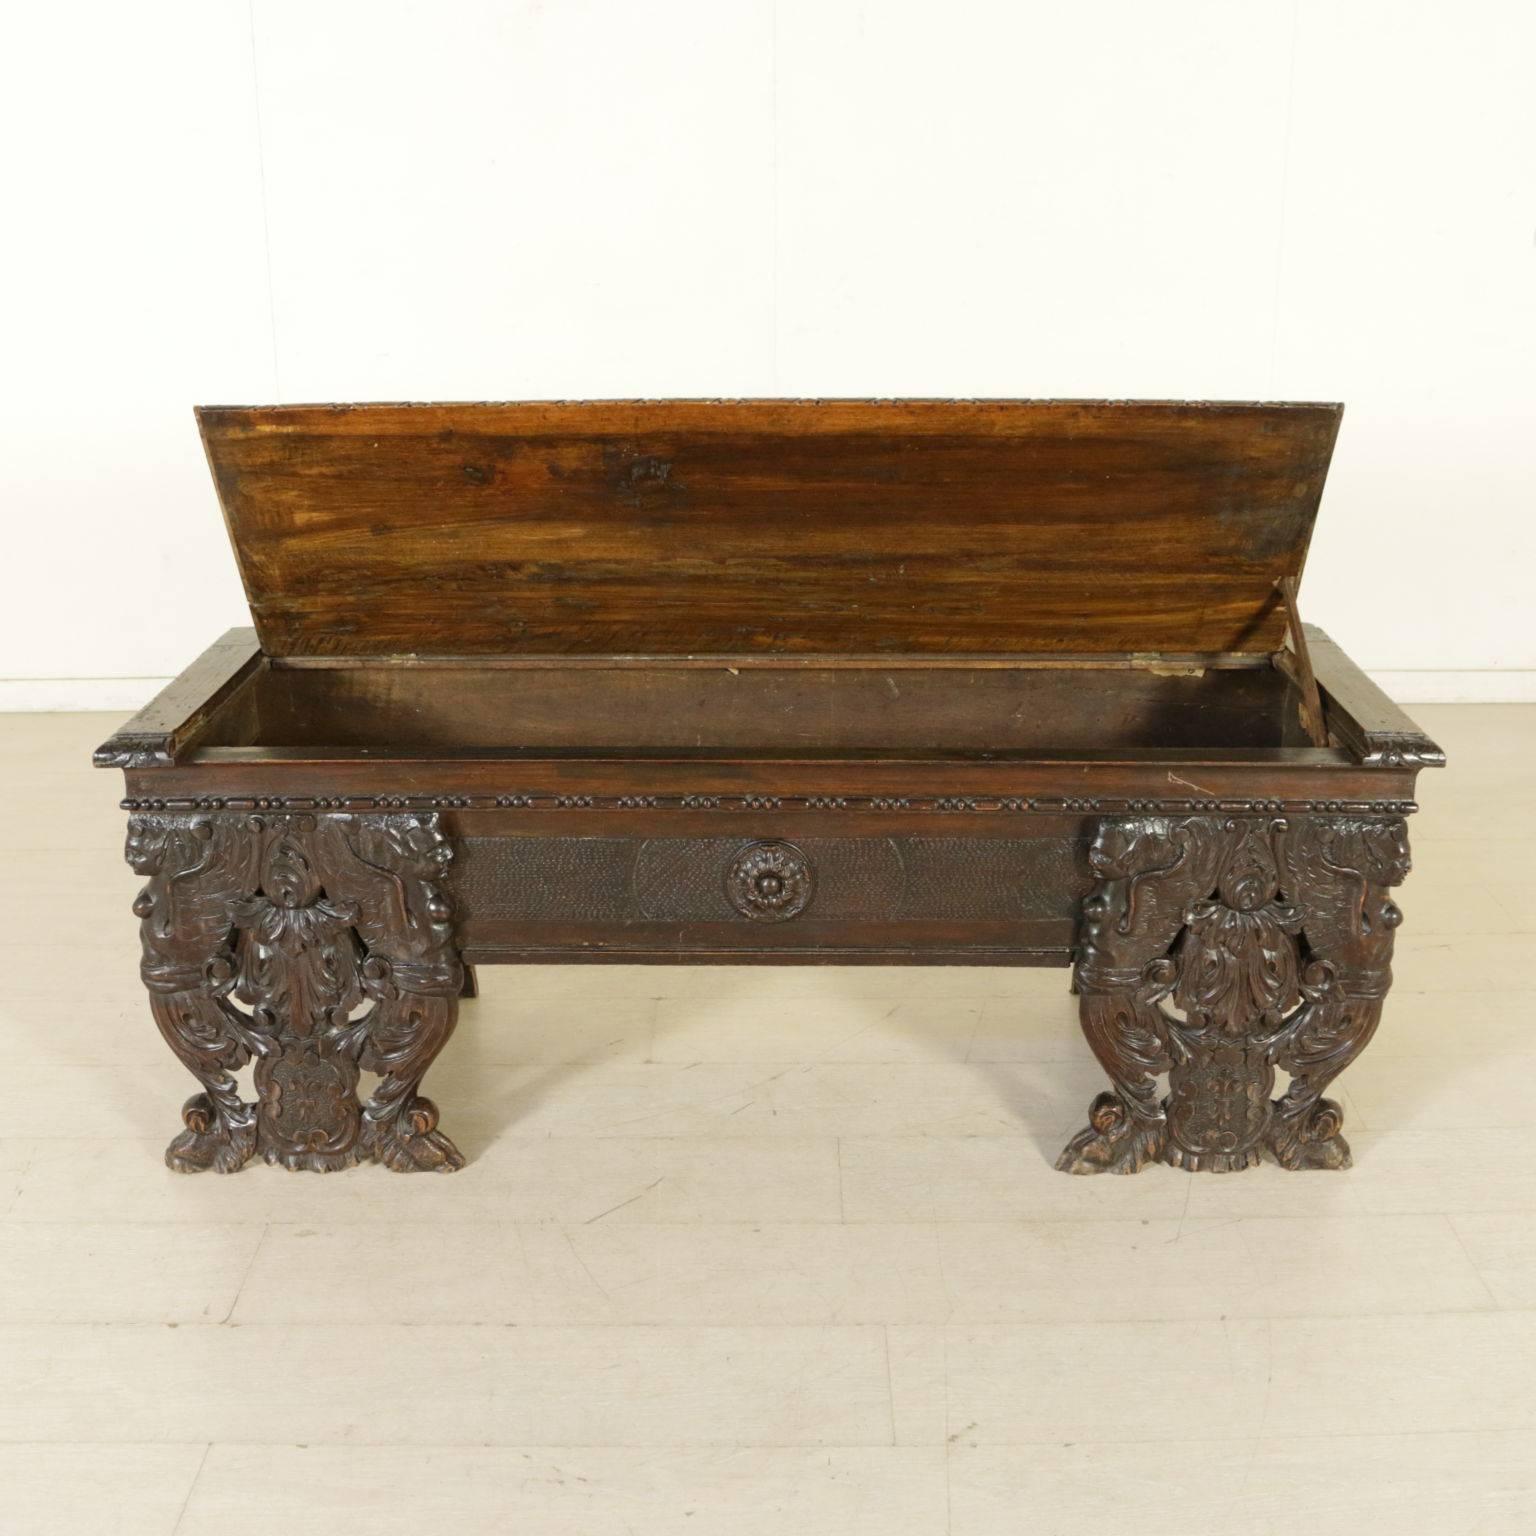 A Neo-Renaissance style carved walnut bench supported by richly carved legs with caryatids and leafs. It features an openable top with an internal compartment. Manufactured in Italy, first half of the 20th century.
 